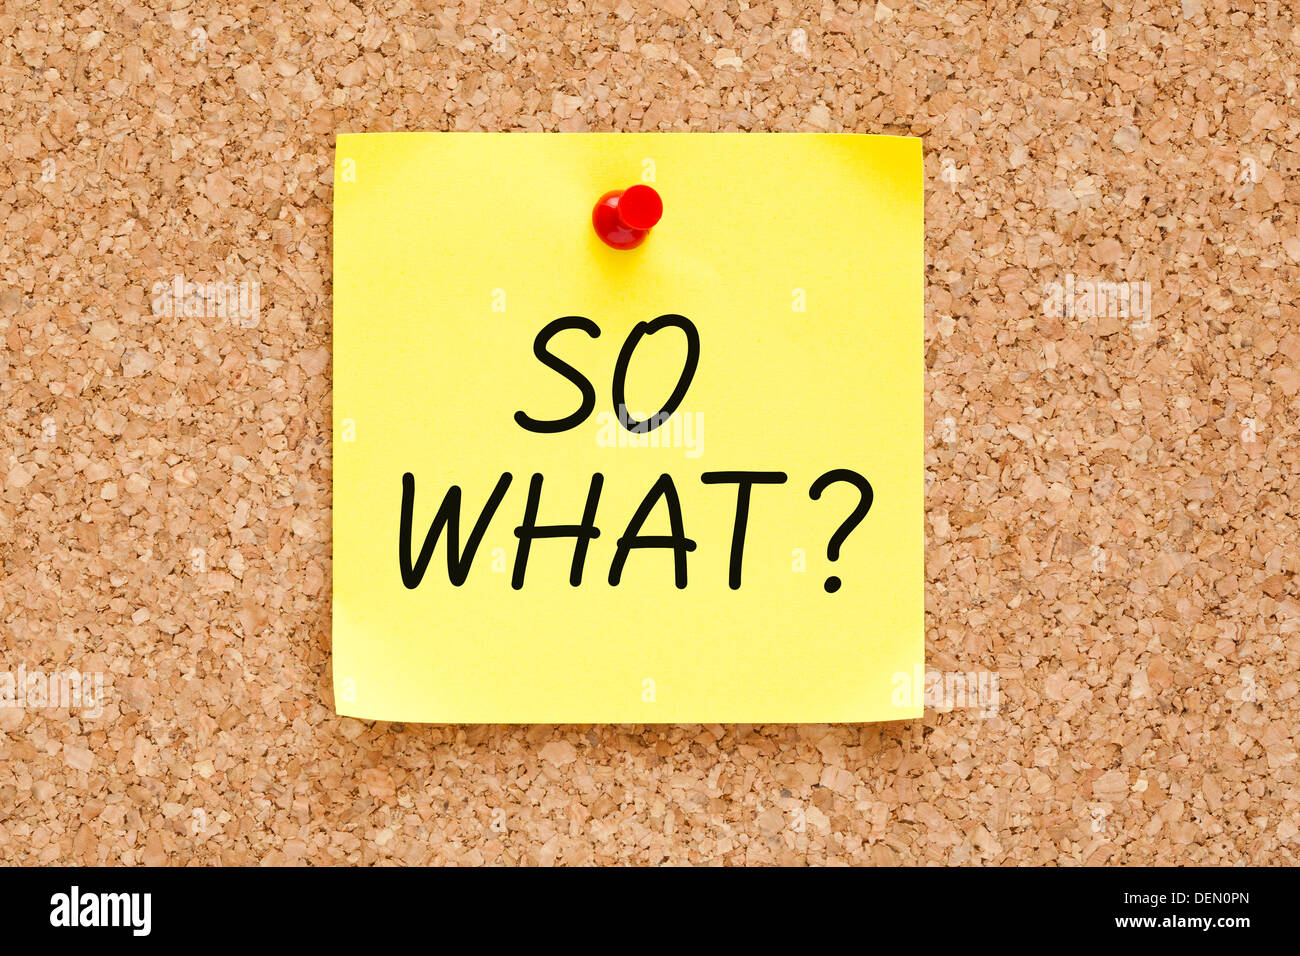 So What, written on an yellow sticky note pinned on a cork bulletin board. Stock Photo